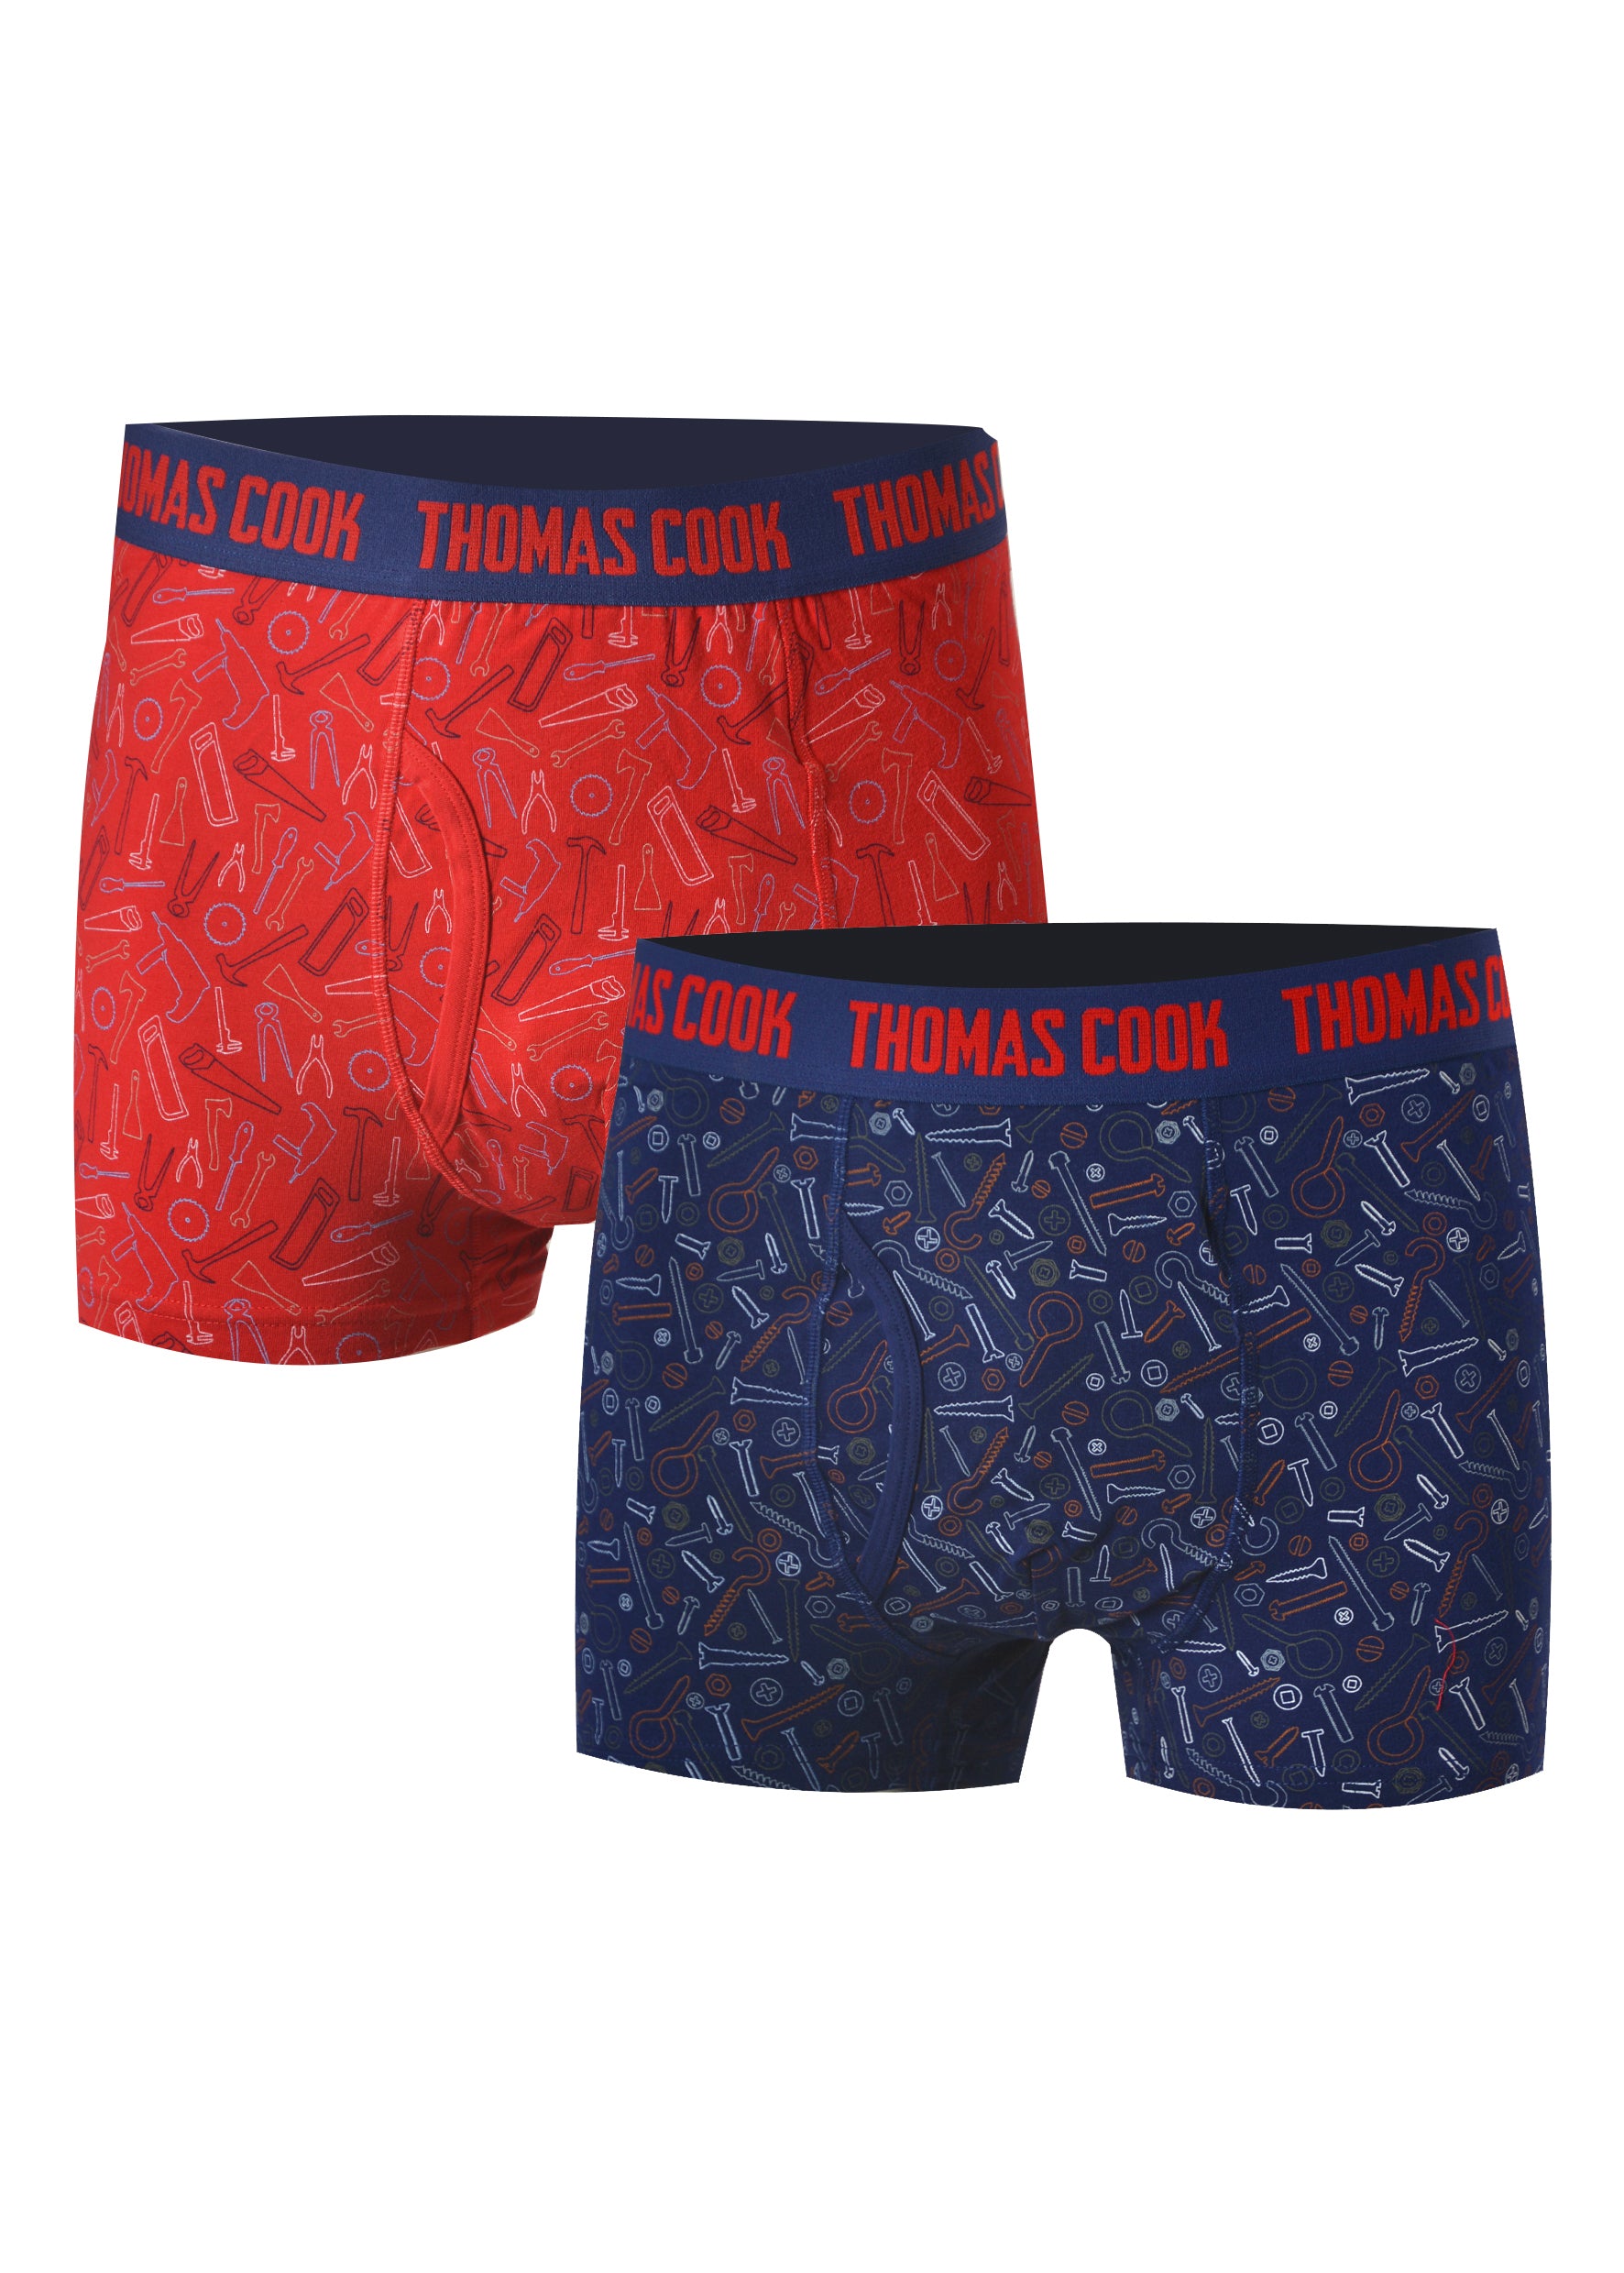 Thomas Cook Precious Tools Underwear Twin Pack